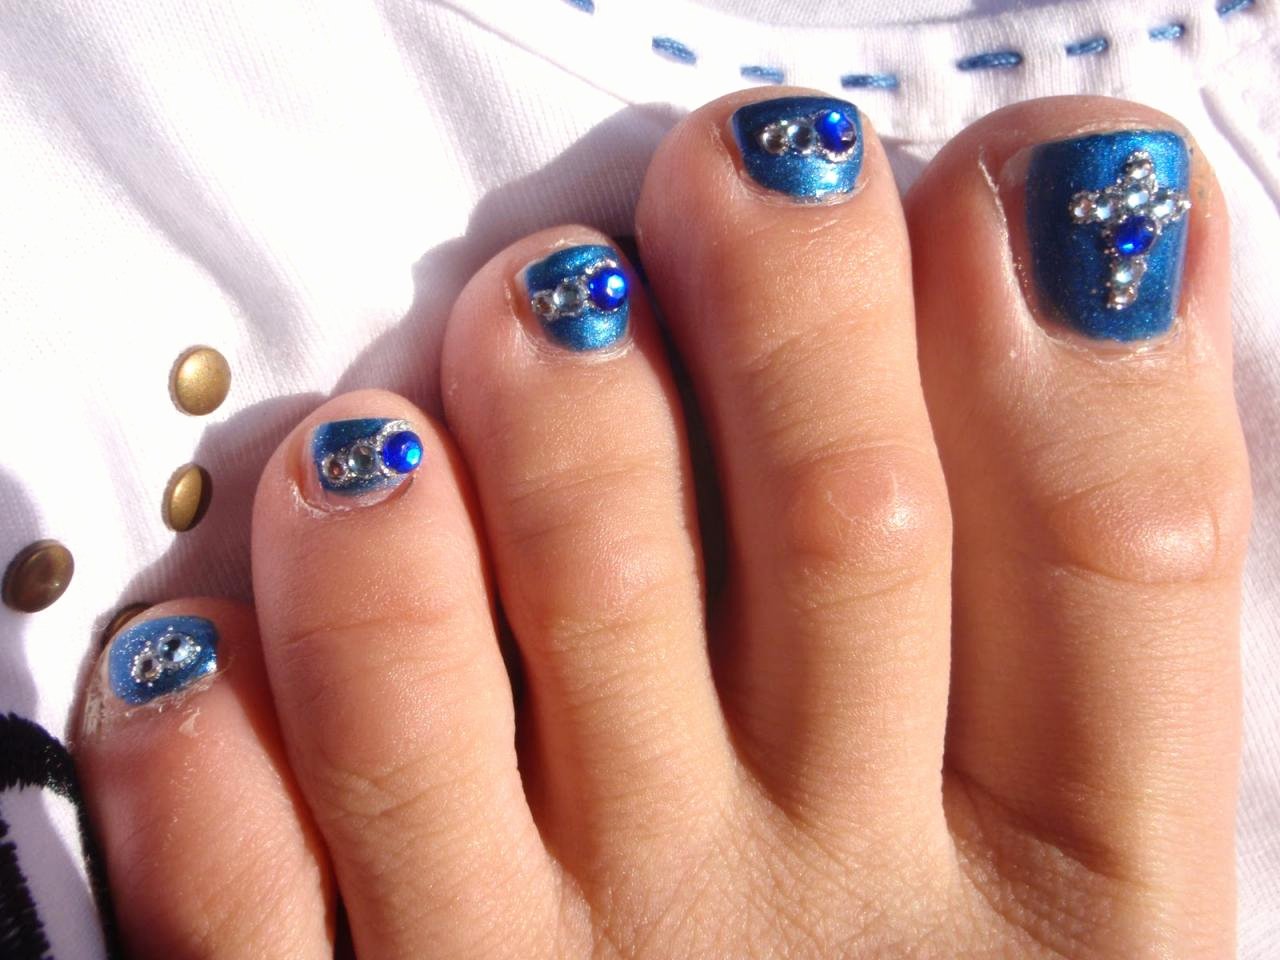 Toe Nail Design Pictures Lovely Pedicures Just Got Better with these 50 Cute toe Nail Designs